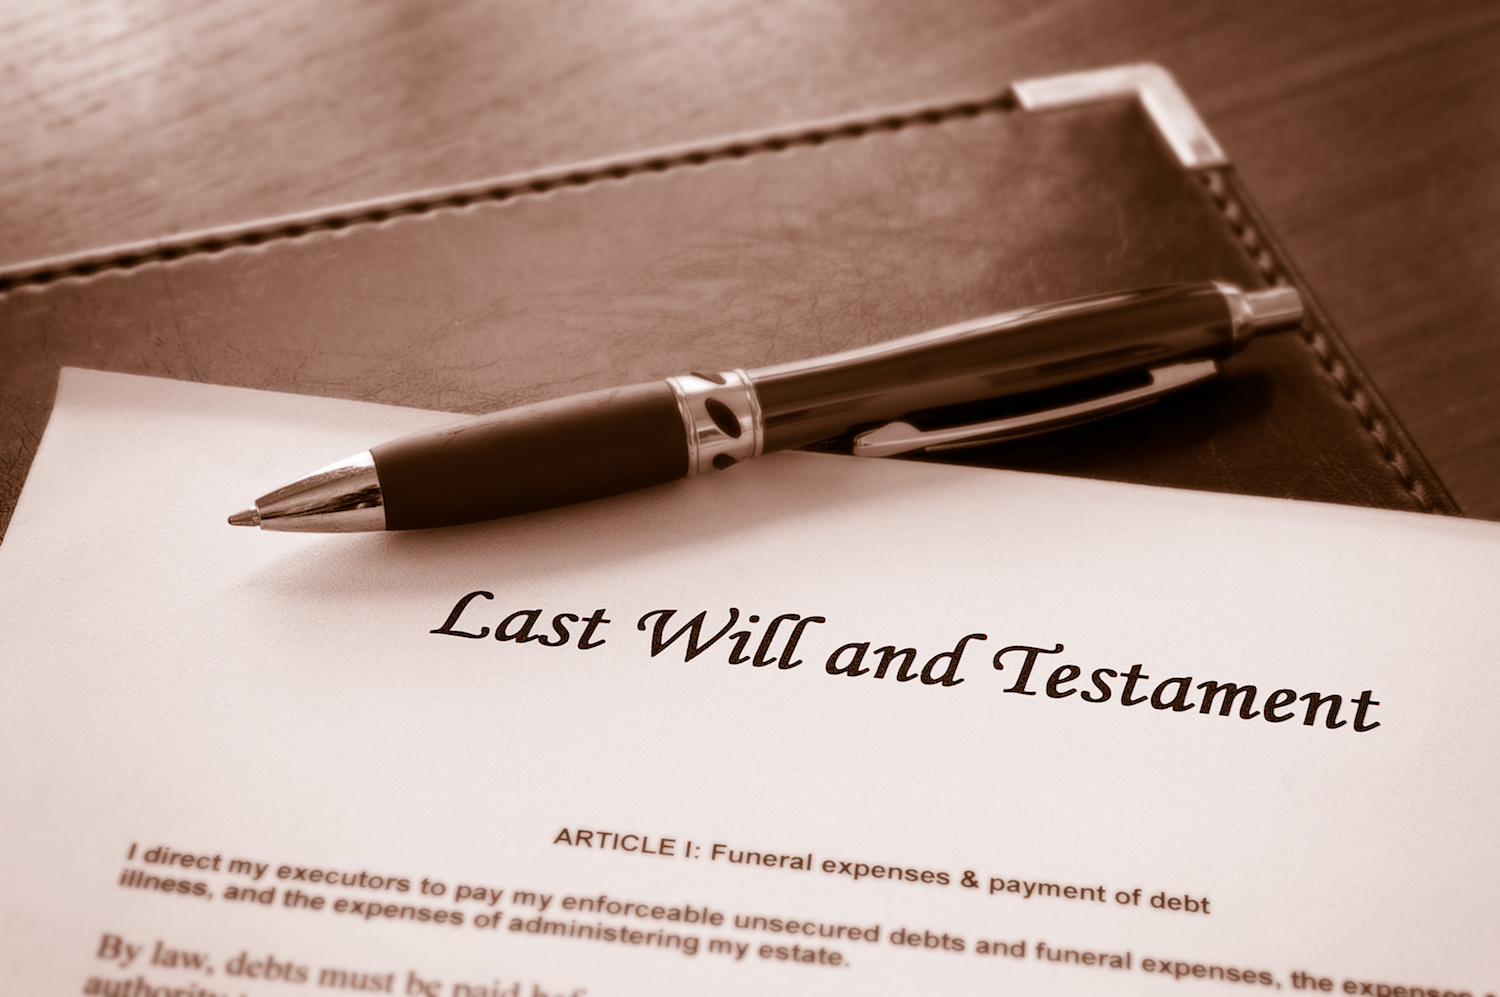 How do you know a will is valid